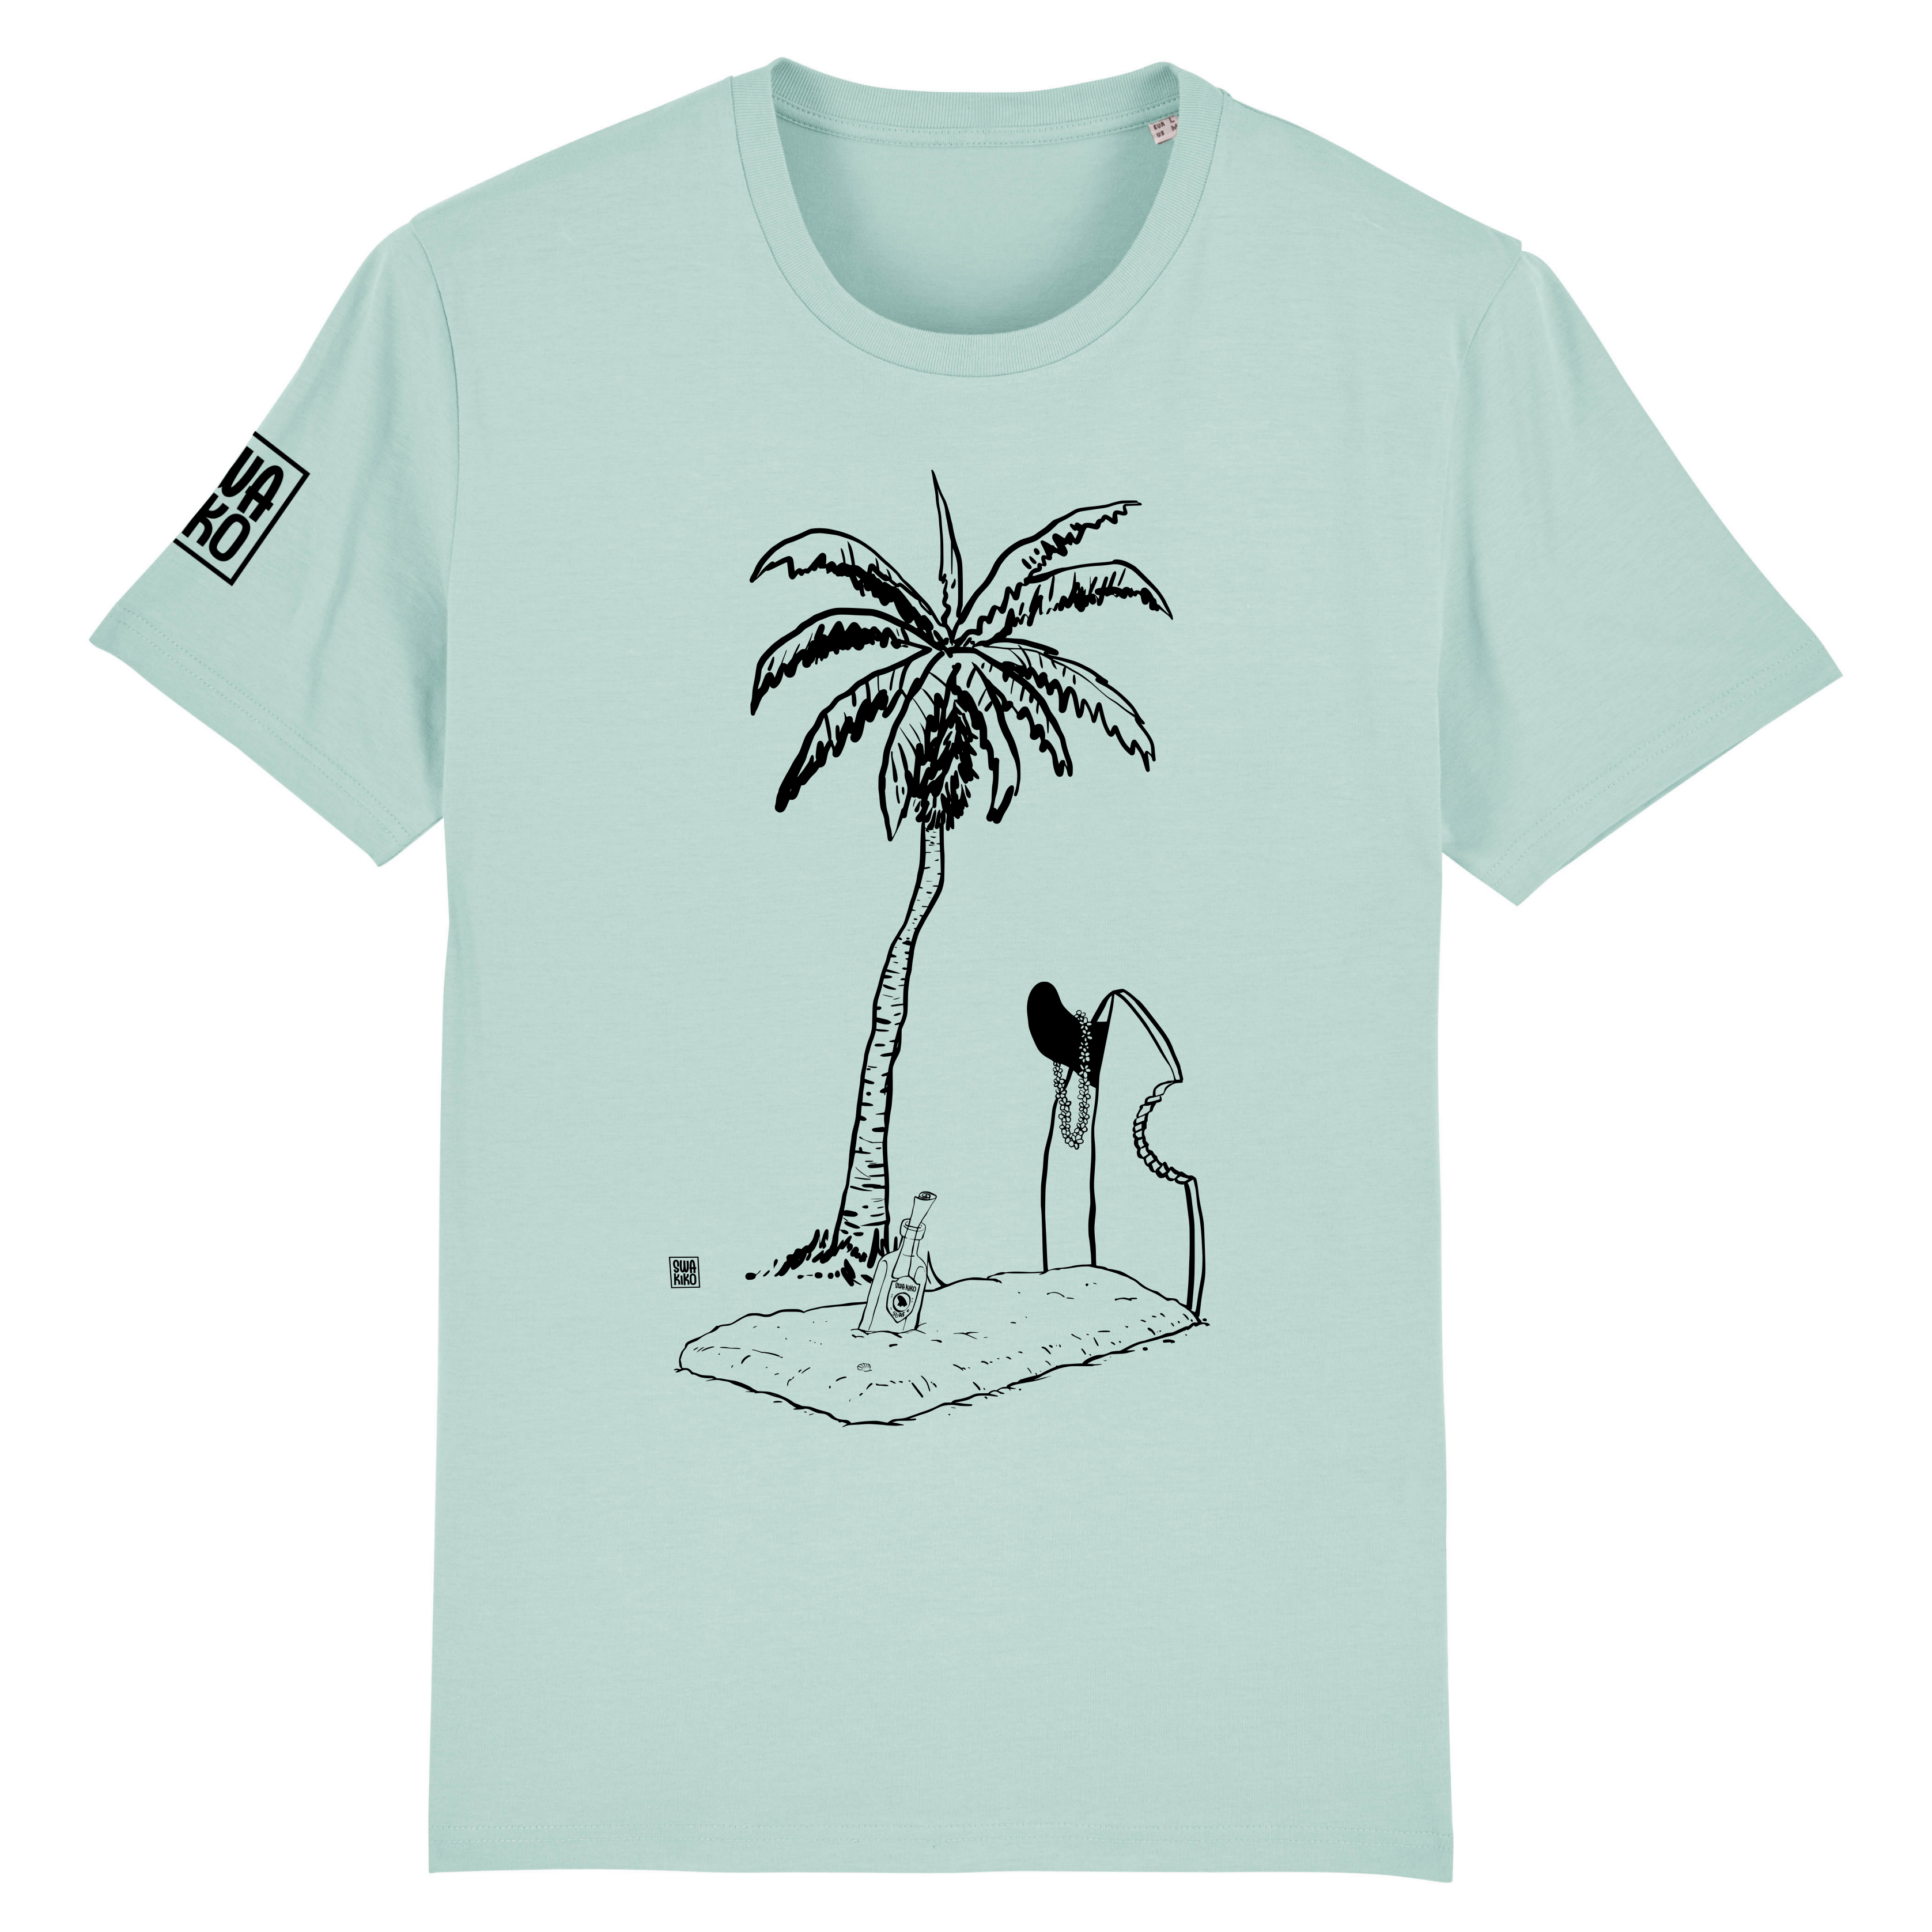 Surf t-shirt men turqoise, Grave with Palmtree